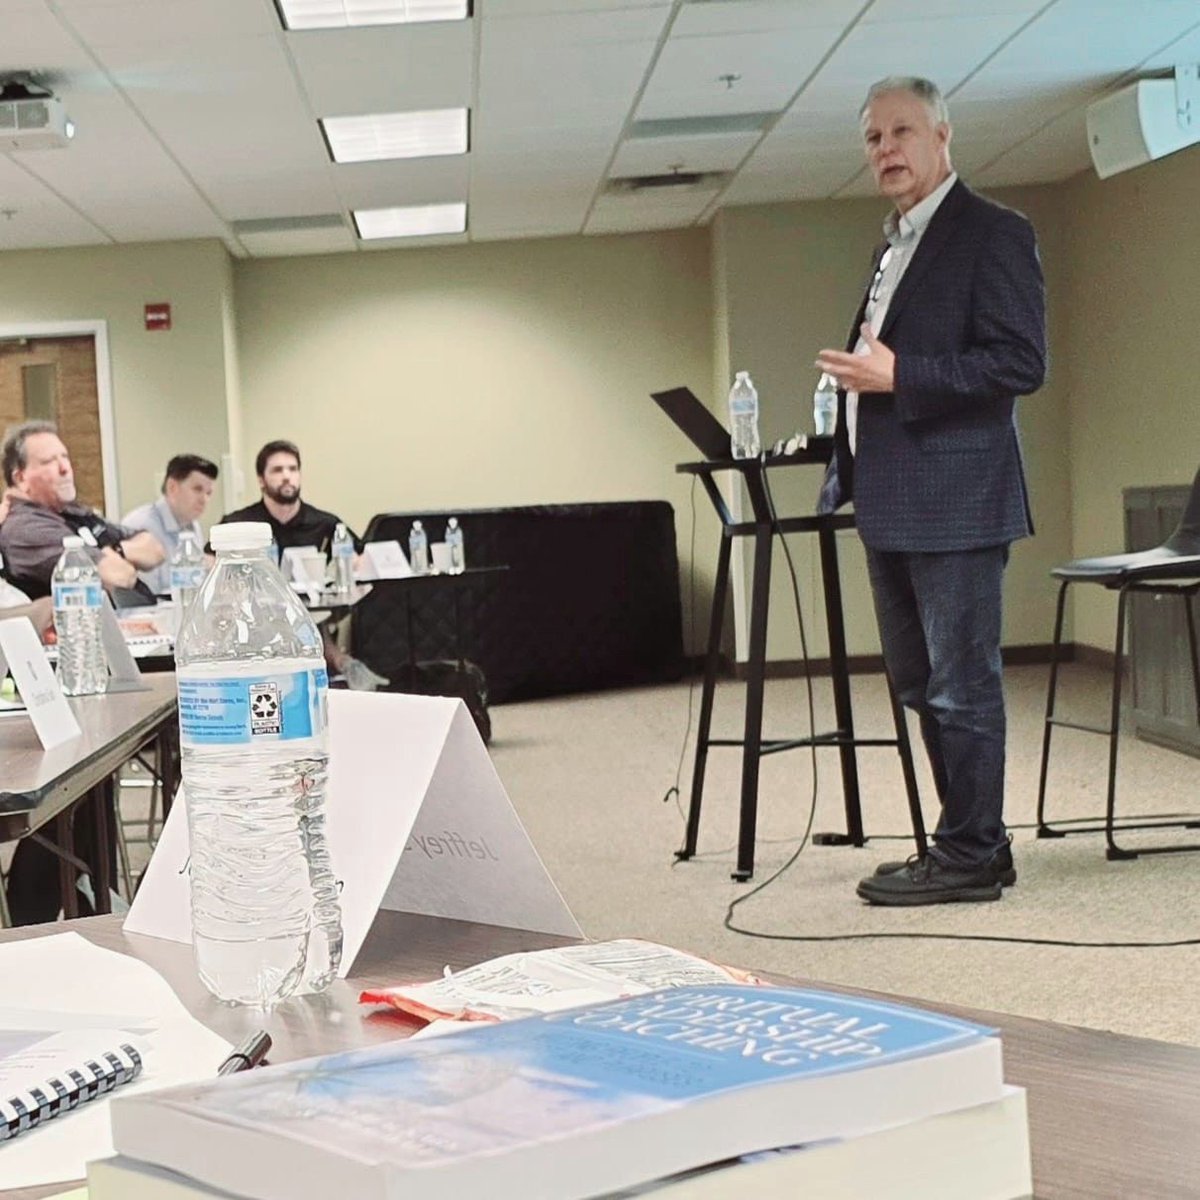 Had a great group in our coaching workshop yesterday at Johnson Ferry Baptist Church in Marietta, GA. We offer 2 workshops in the Atlanta area each year. We are also offering one in Pennsylvania and South Dakota as well this year.